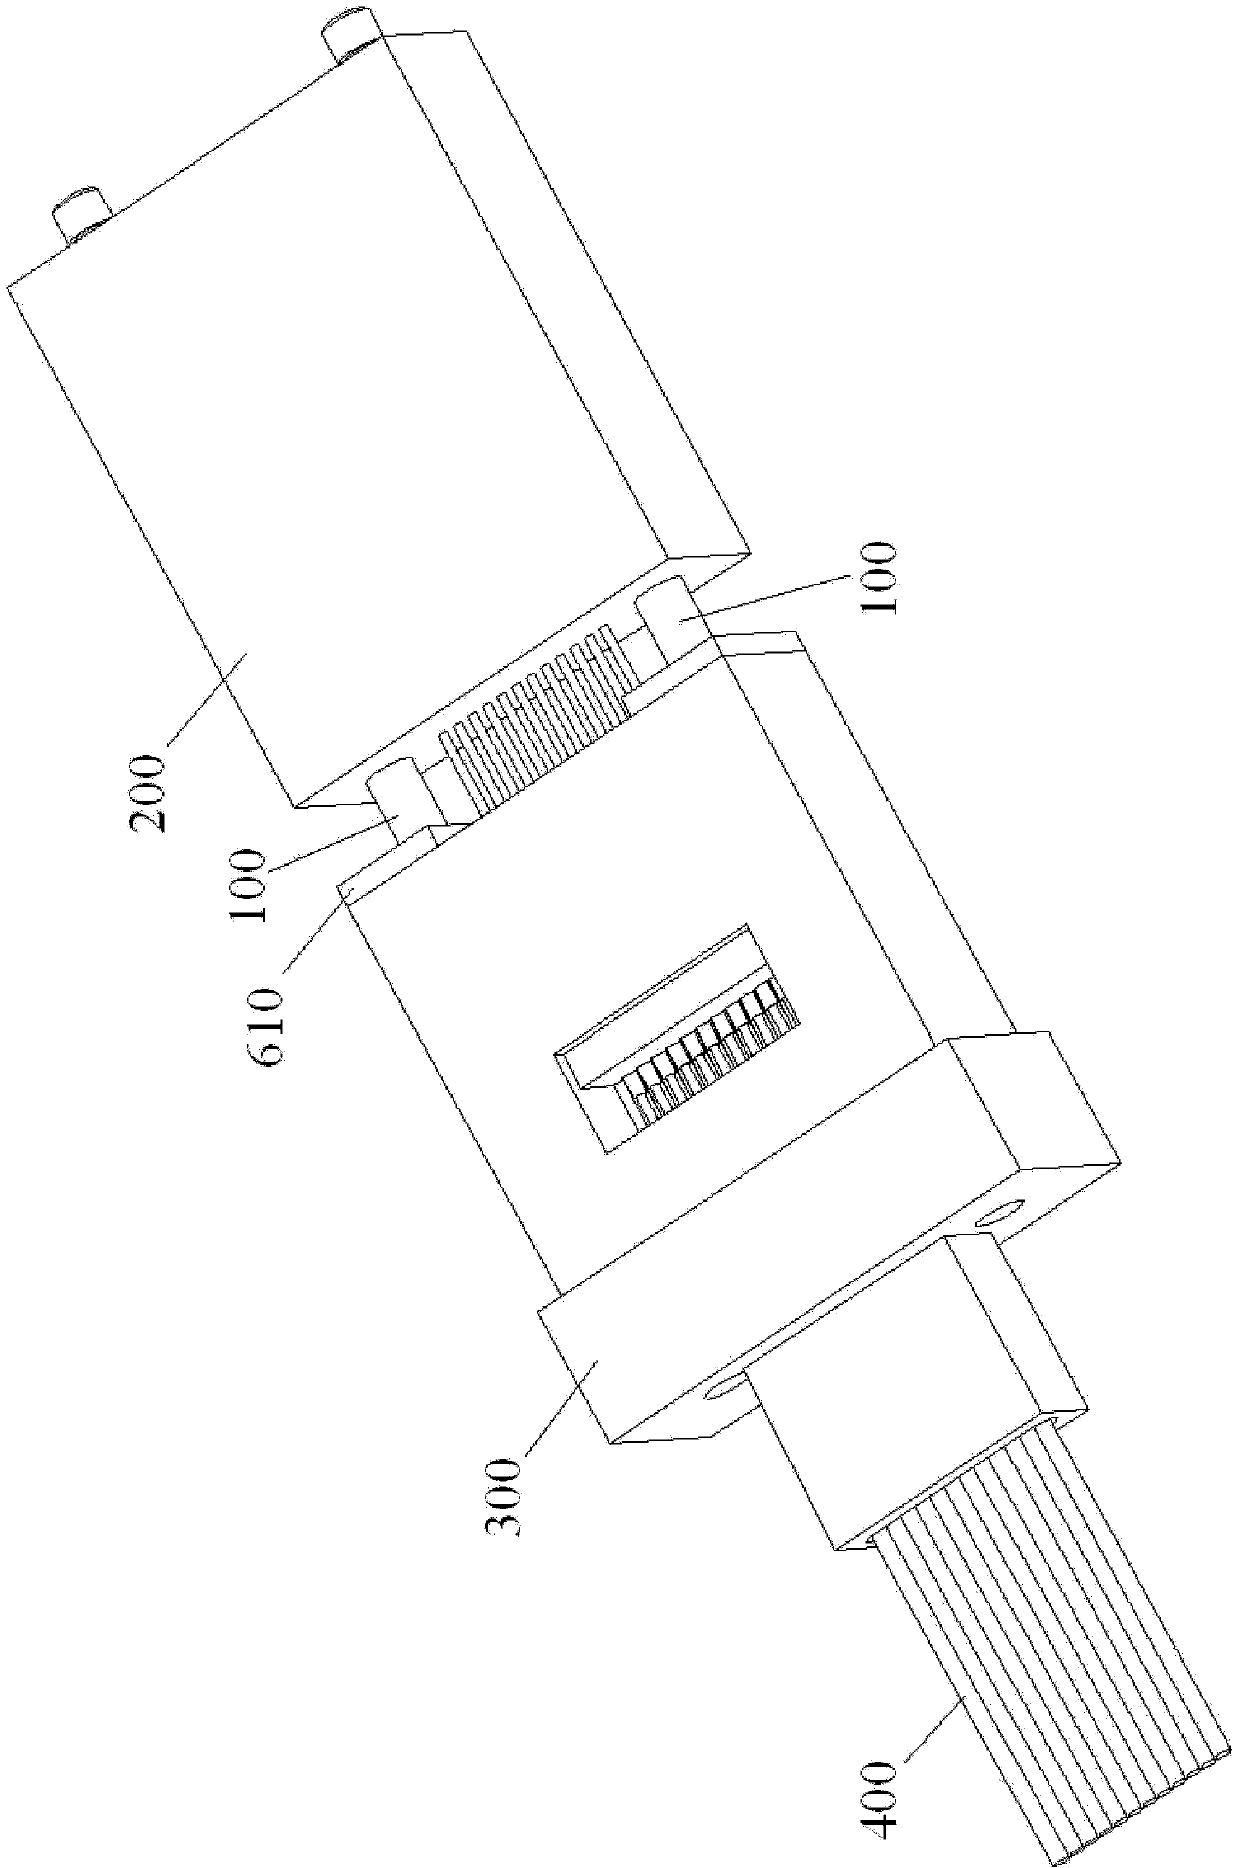 Aligning tool, aligning method, fiber inserting core assembly, and fiber connector